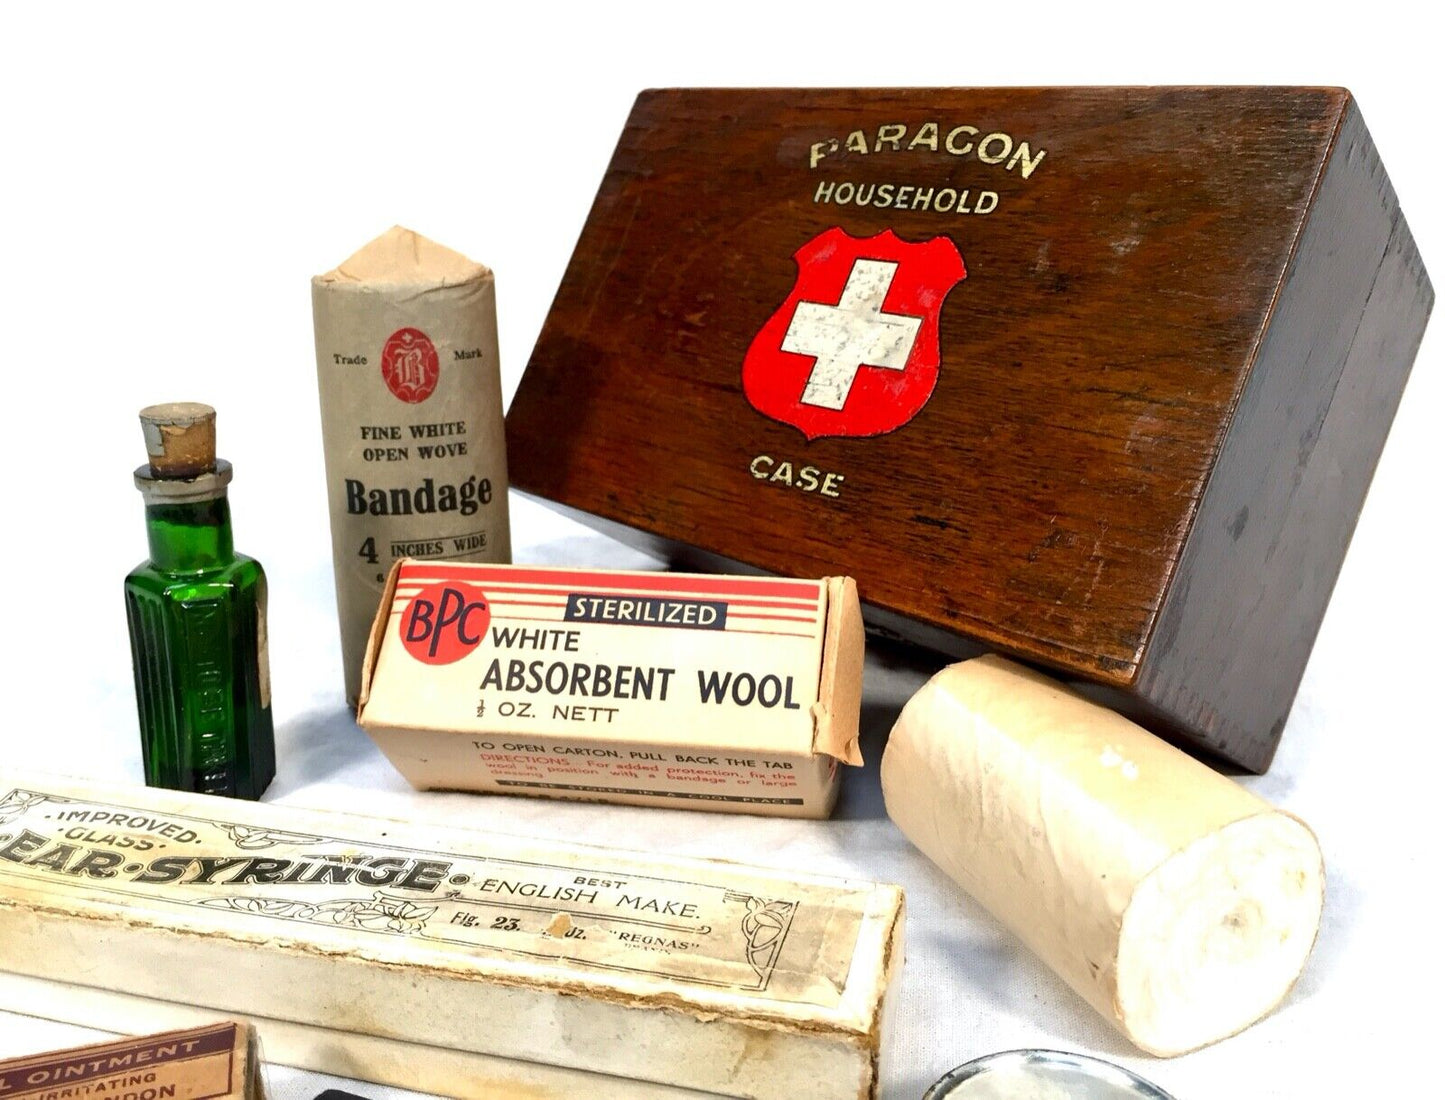 Antique Wooden Paragon Household Ambulance First Aid Box & Contents Apothecary